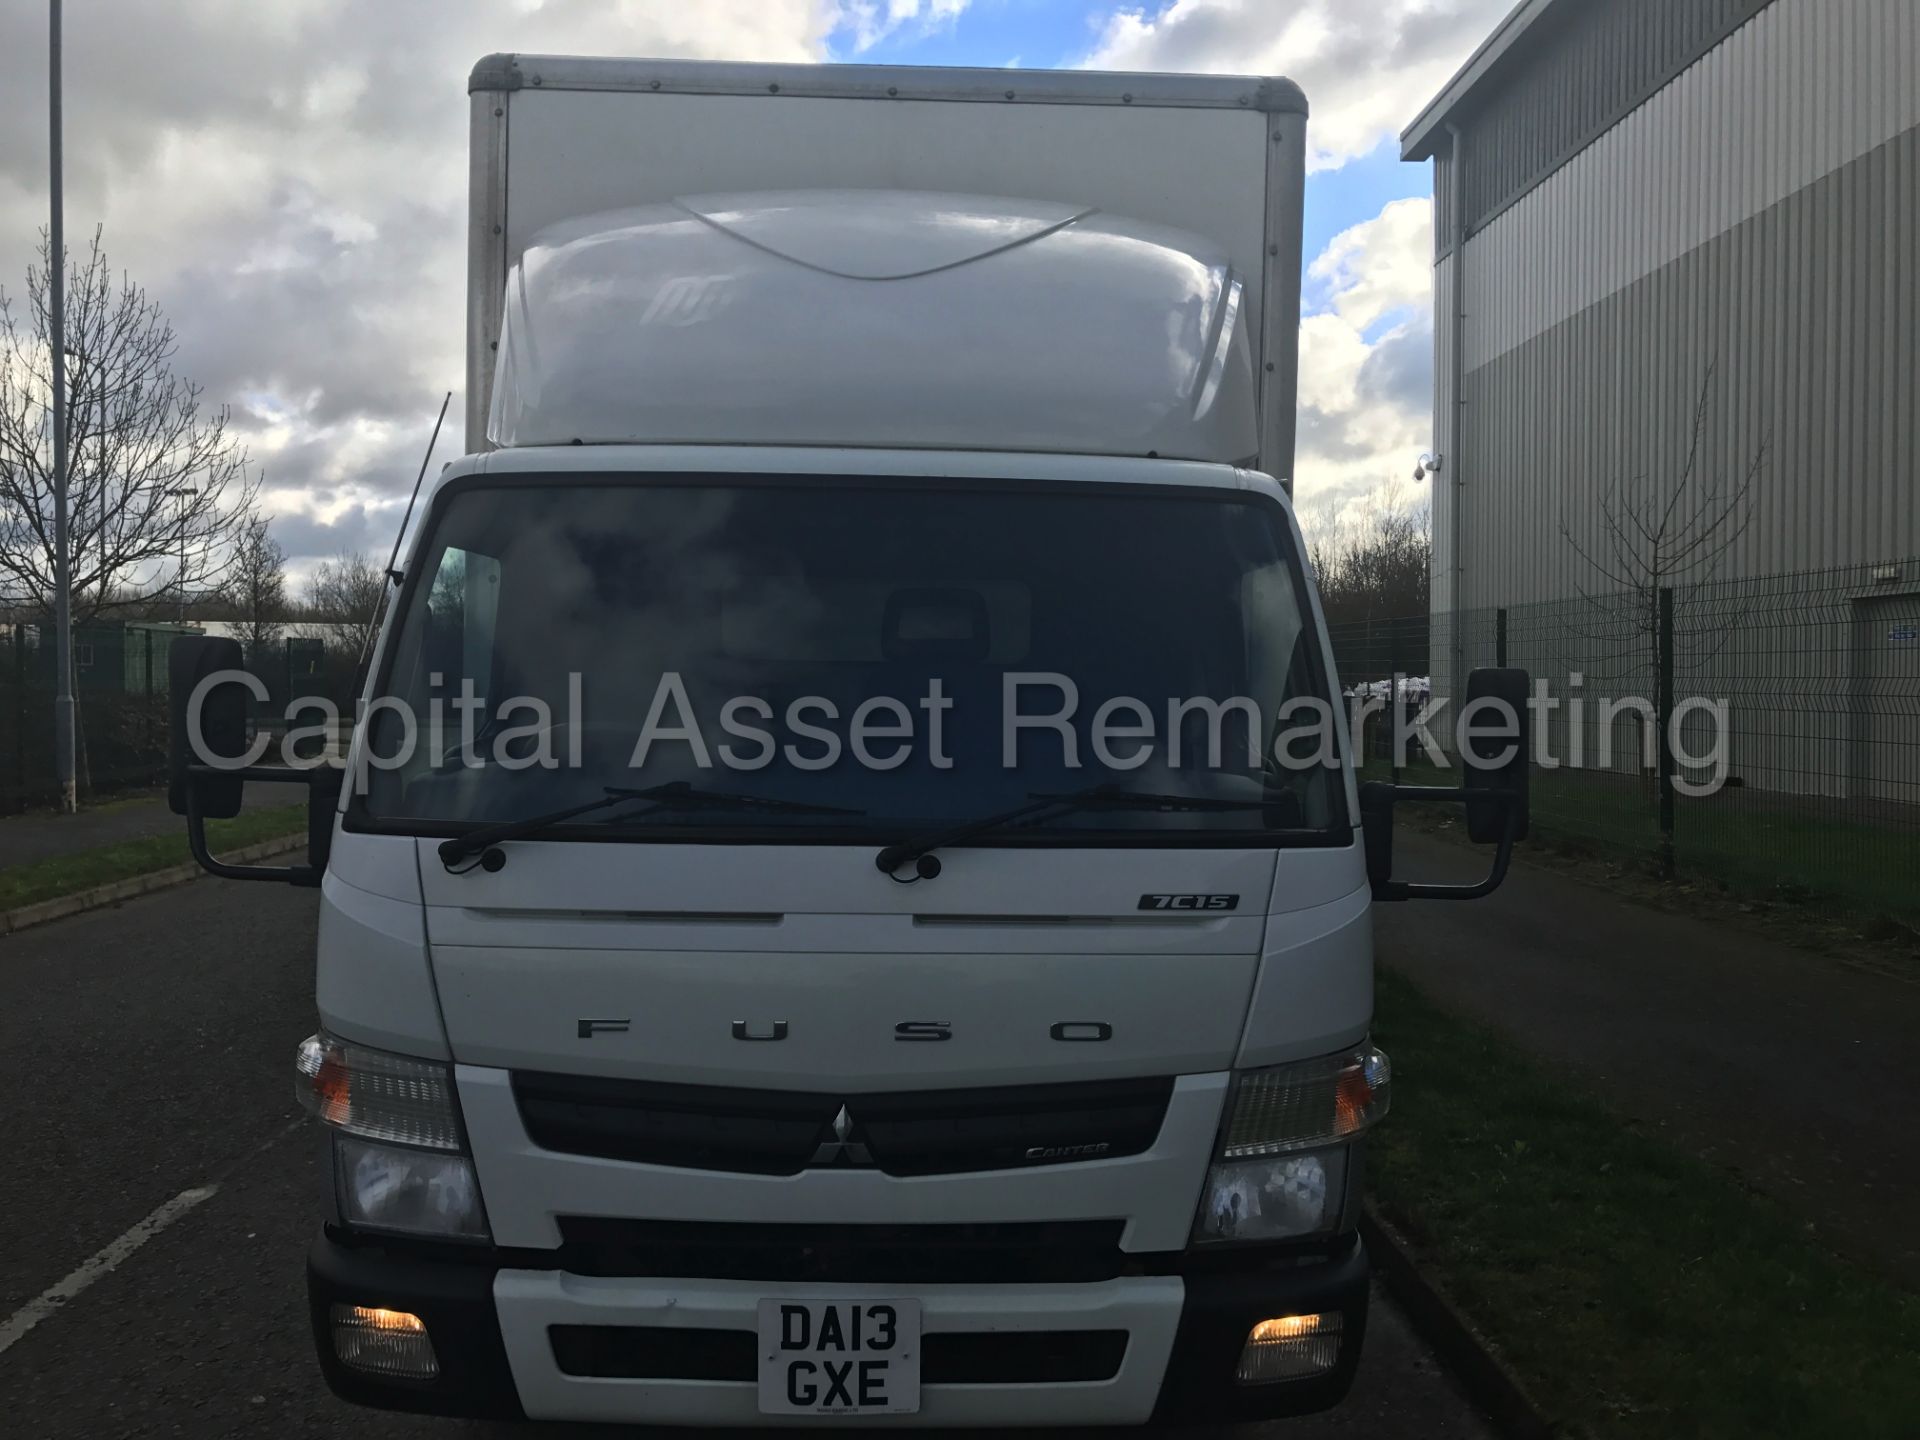 MITSUBISHI FUSO CANTER 7C15 - 7500KG GROSS - 1 OWNER - 13 REG - LOW MILEAGE - BOX VAN WITH TAIL LIFT - Image 2 of 14